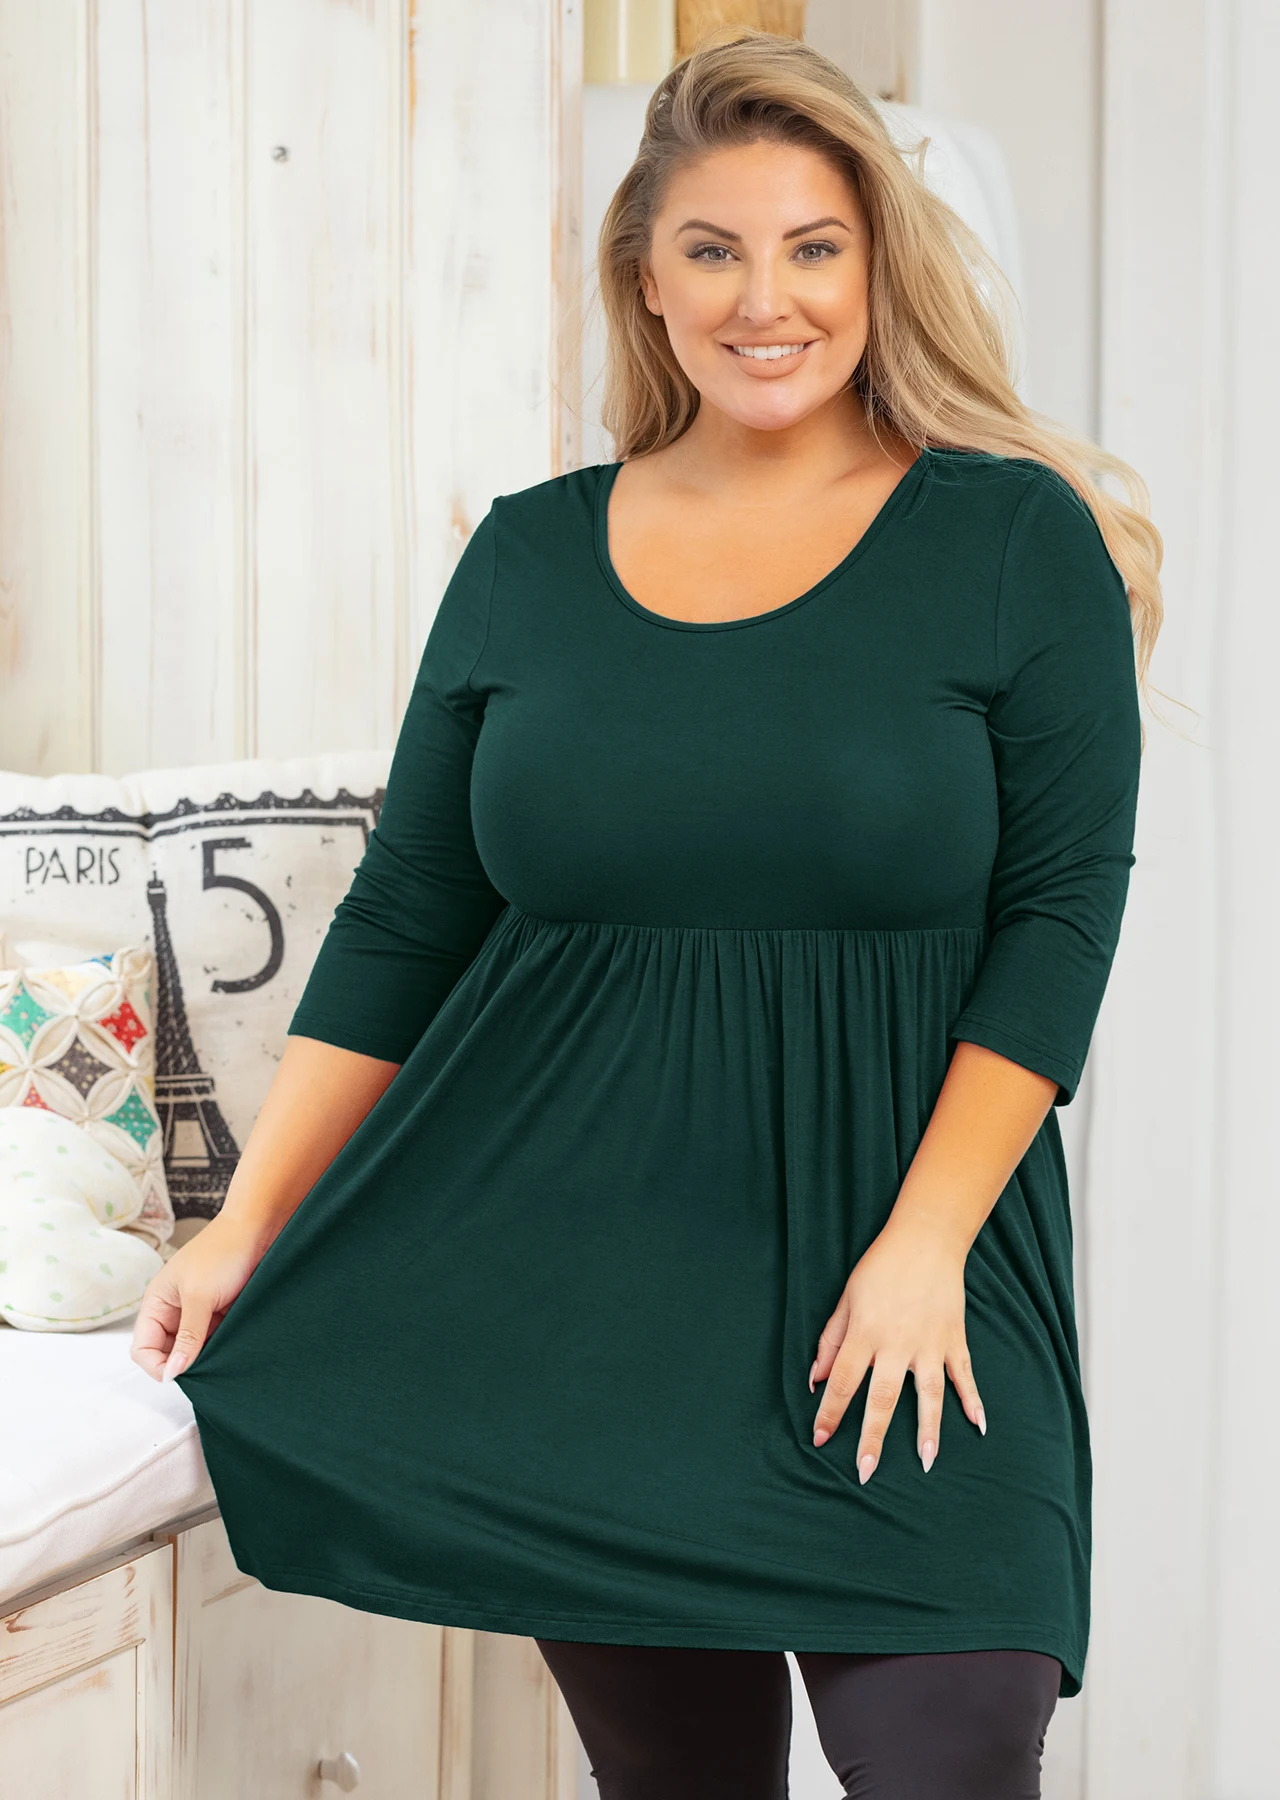 showmall-women's-plus-size-tops-3-4-sleeve-flowy-shirts-casual-blouses-babydoll-tunic-tops